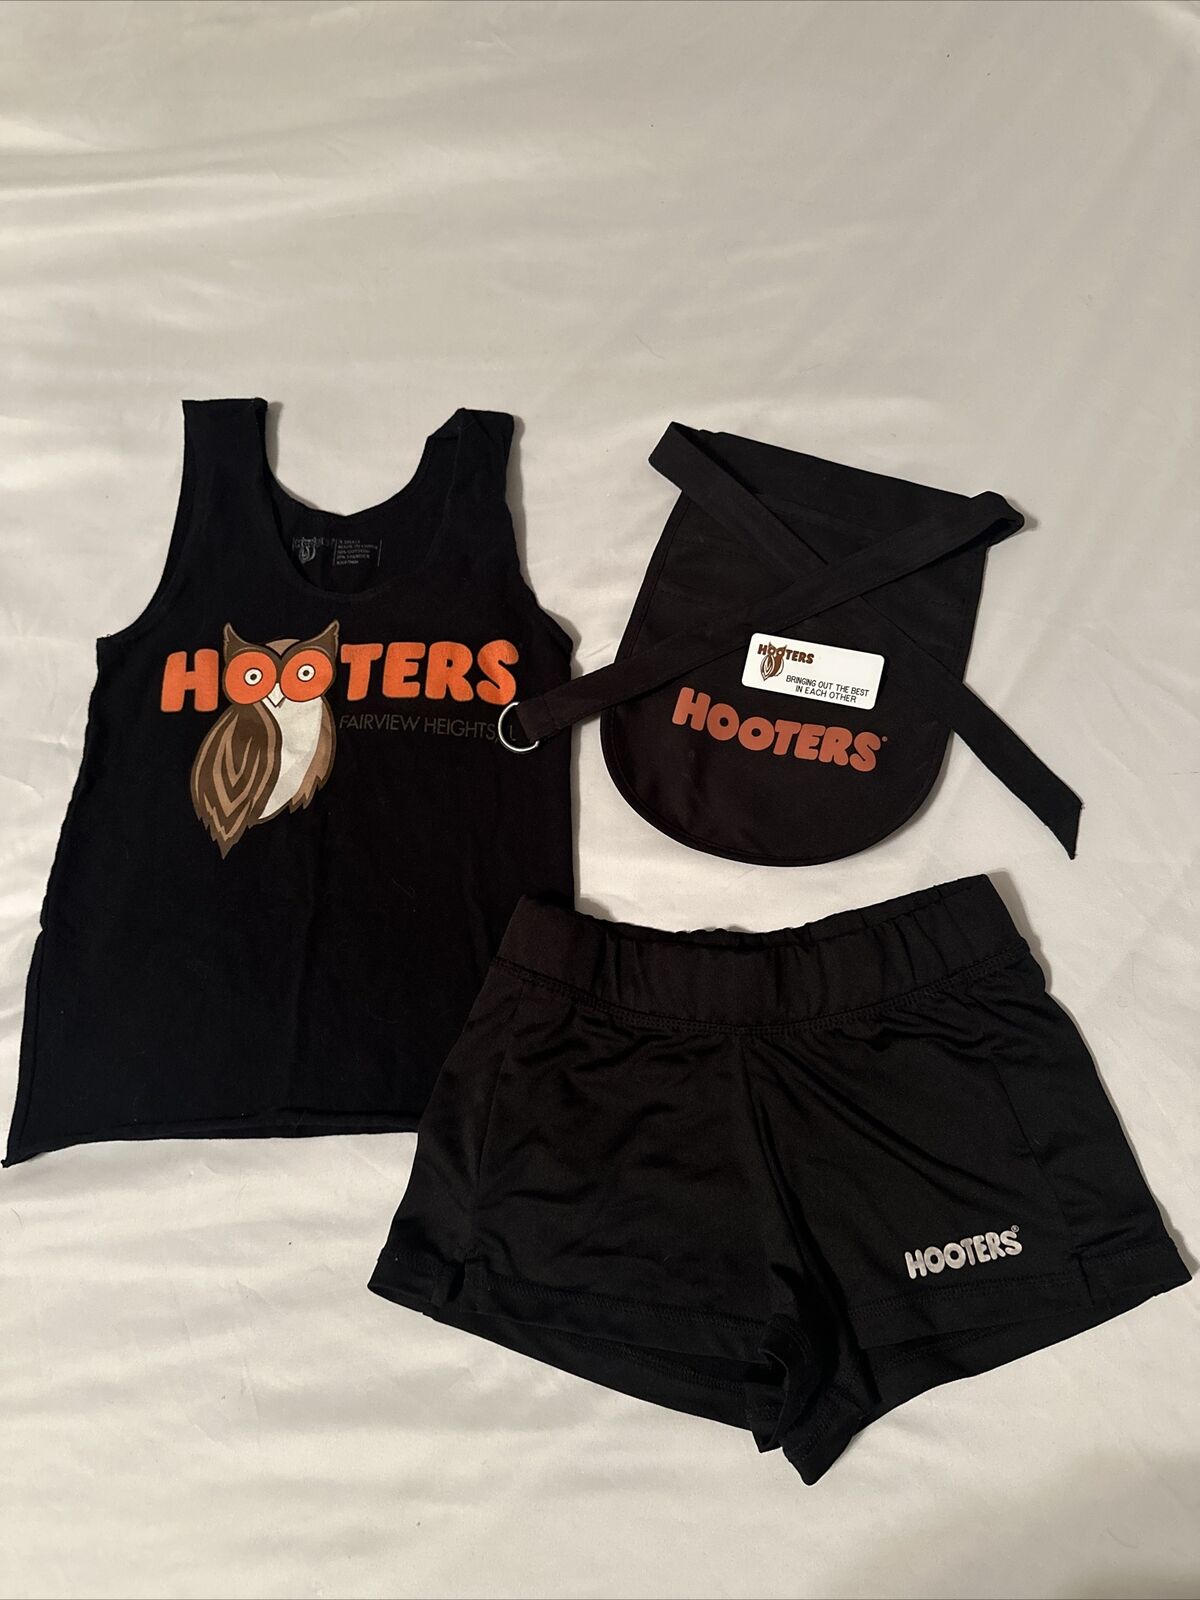 HOOTERS BLACK UNIFORM TANK & SHORTS. FULL COMPLETE SET POUCH & NAME TAG. SIZE XS